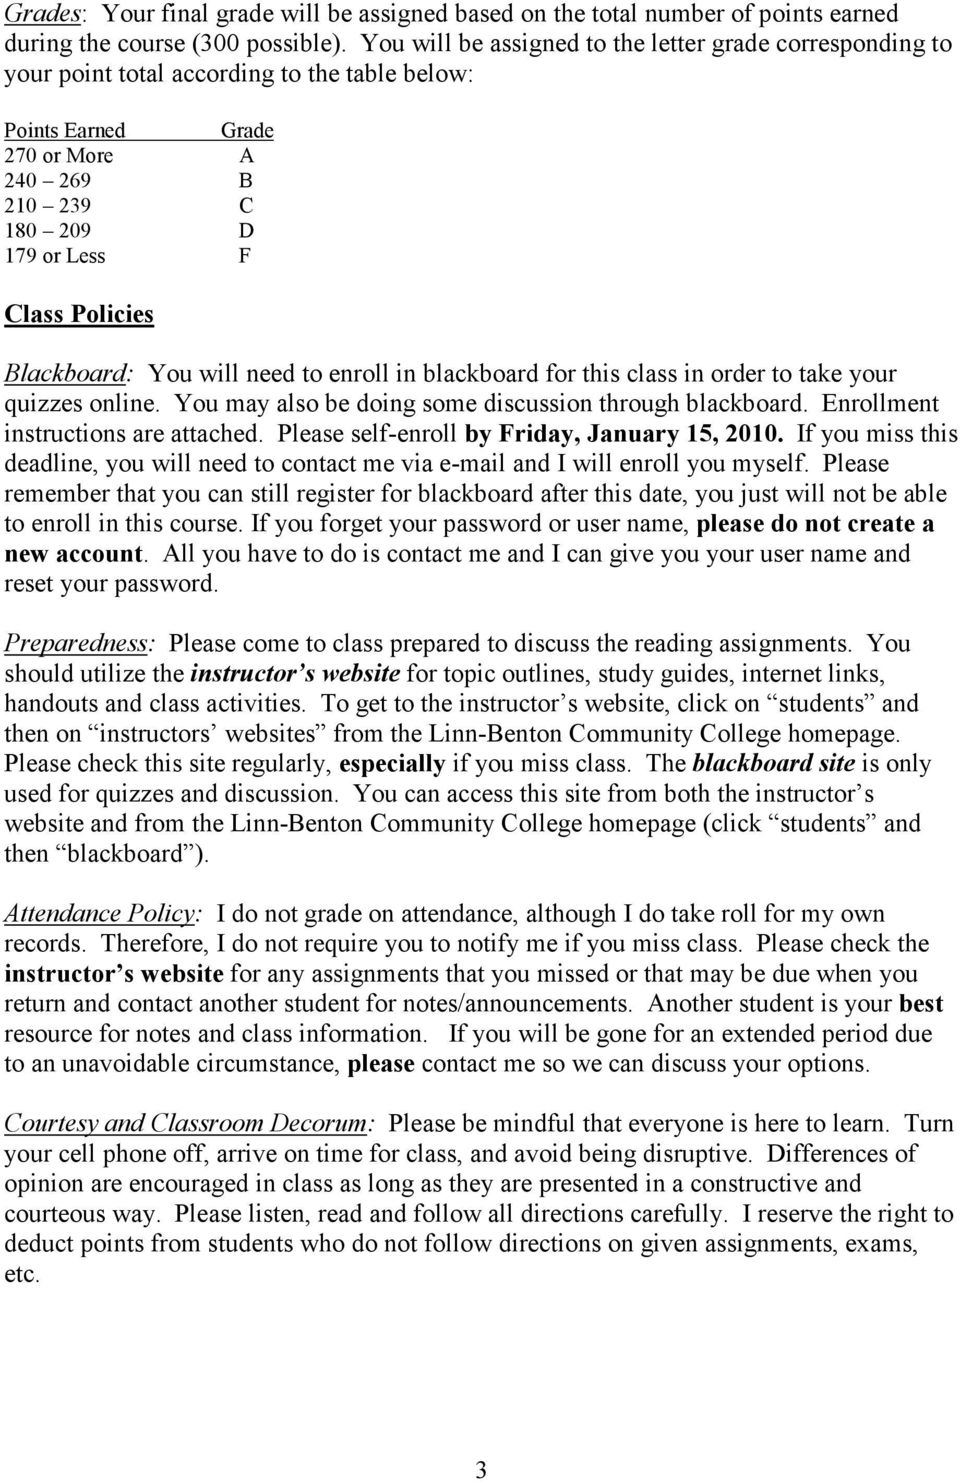 Blackboard: You will need to enroll in blackboard for this class in order to take your quizzes online. You may also be doing some discussion through blackboard. Enrollment instructions are attached.